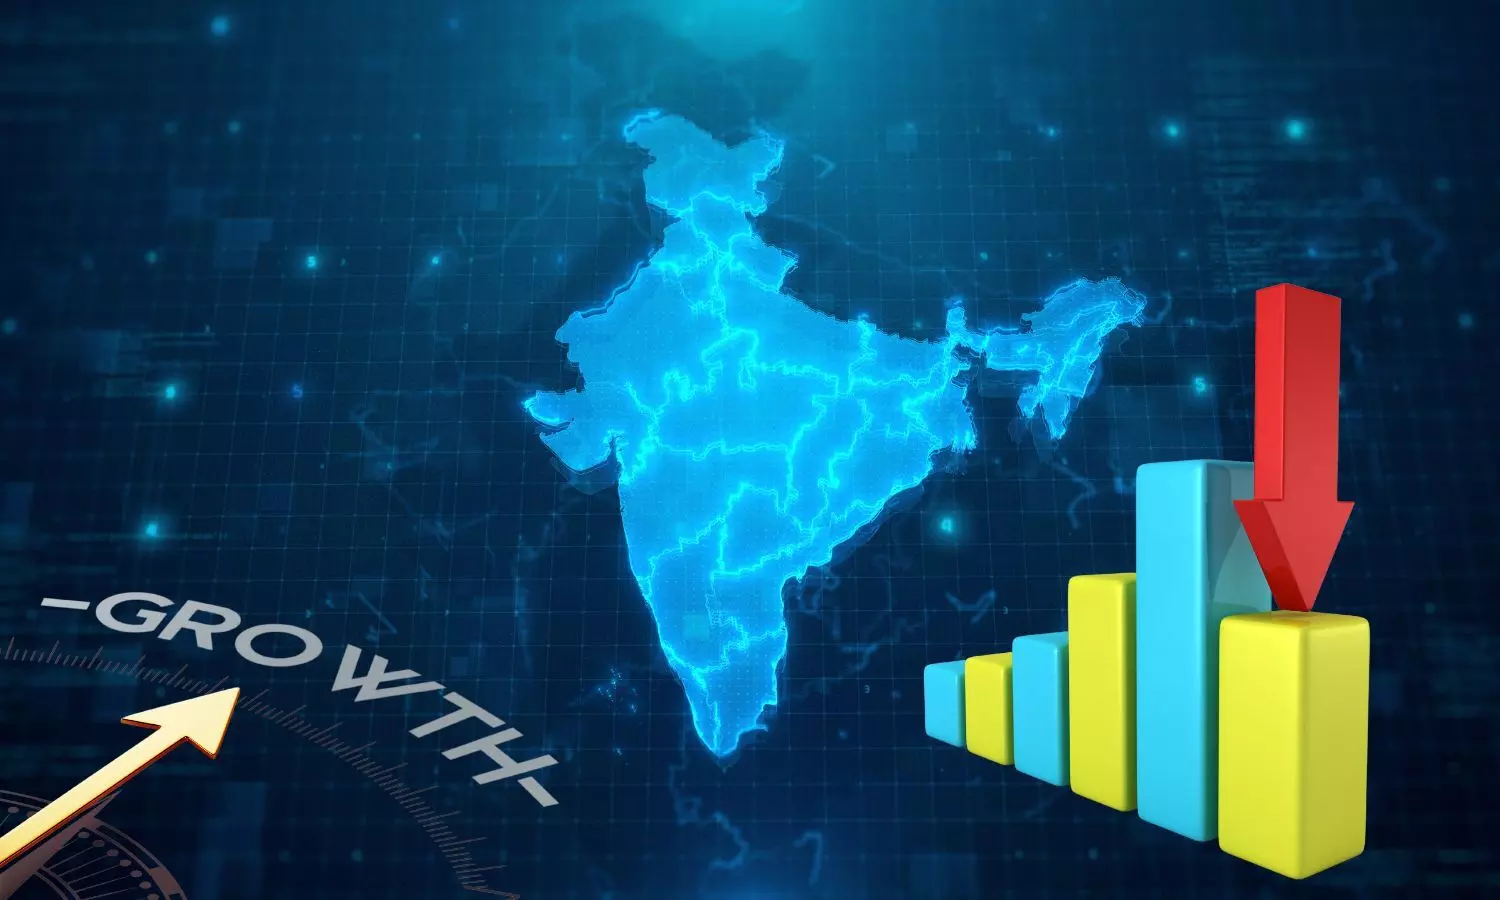 india growth rate, growth forecast